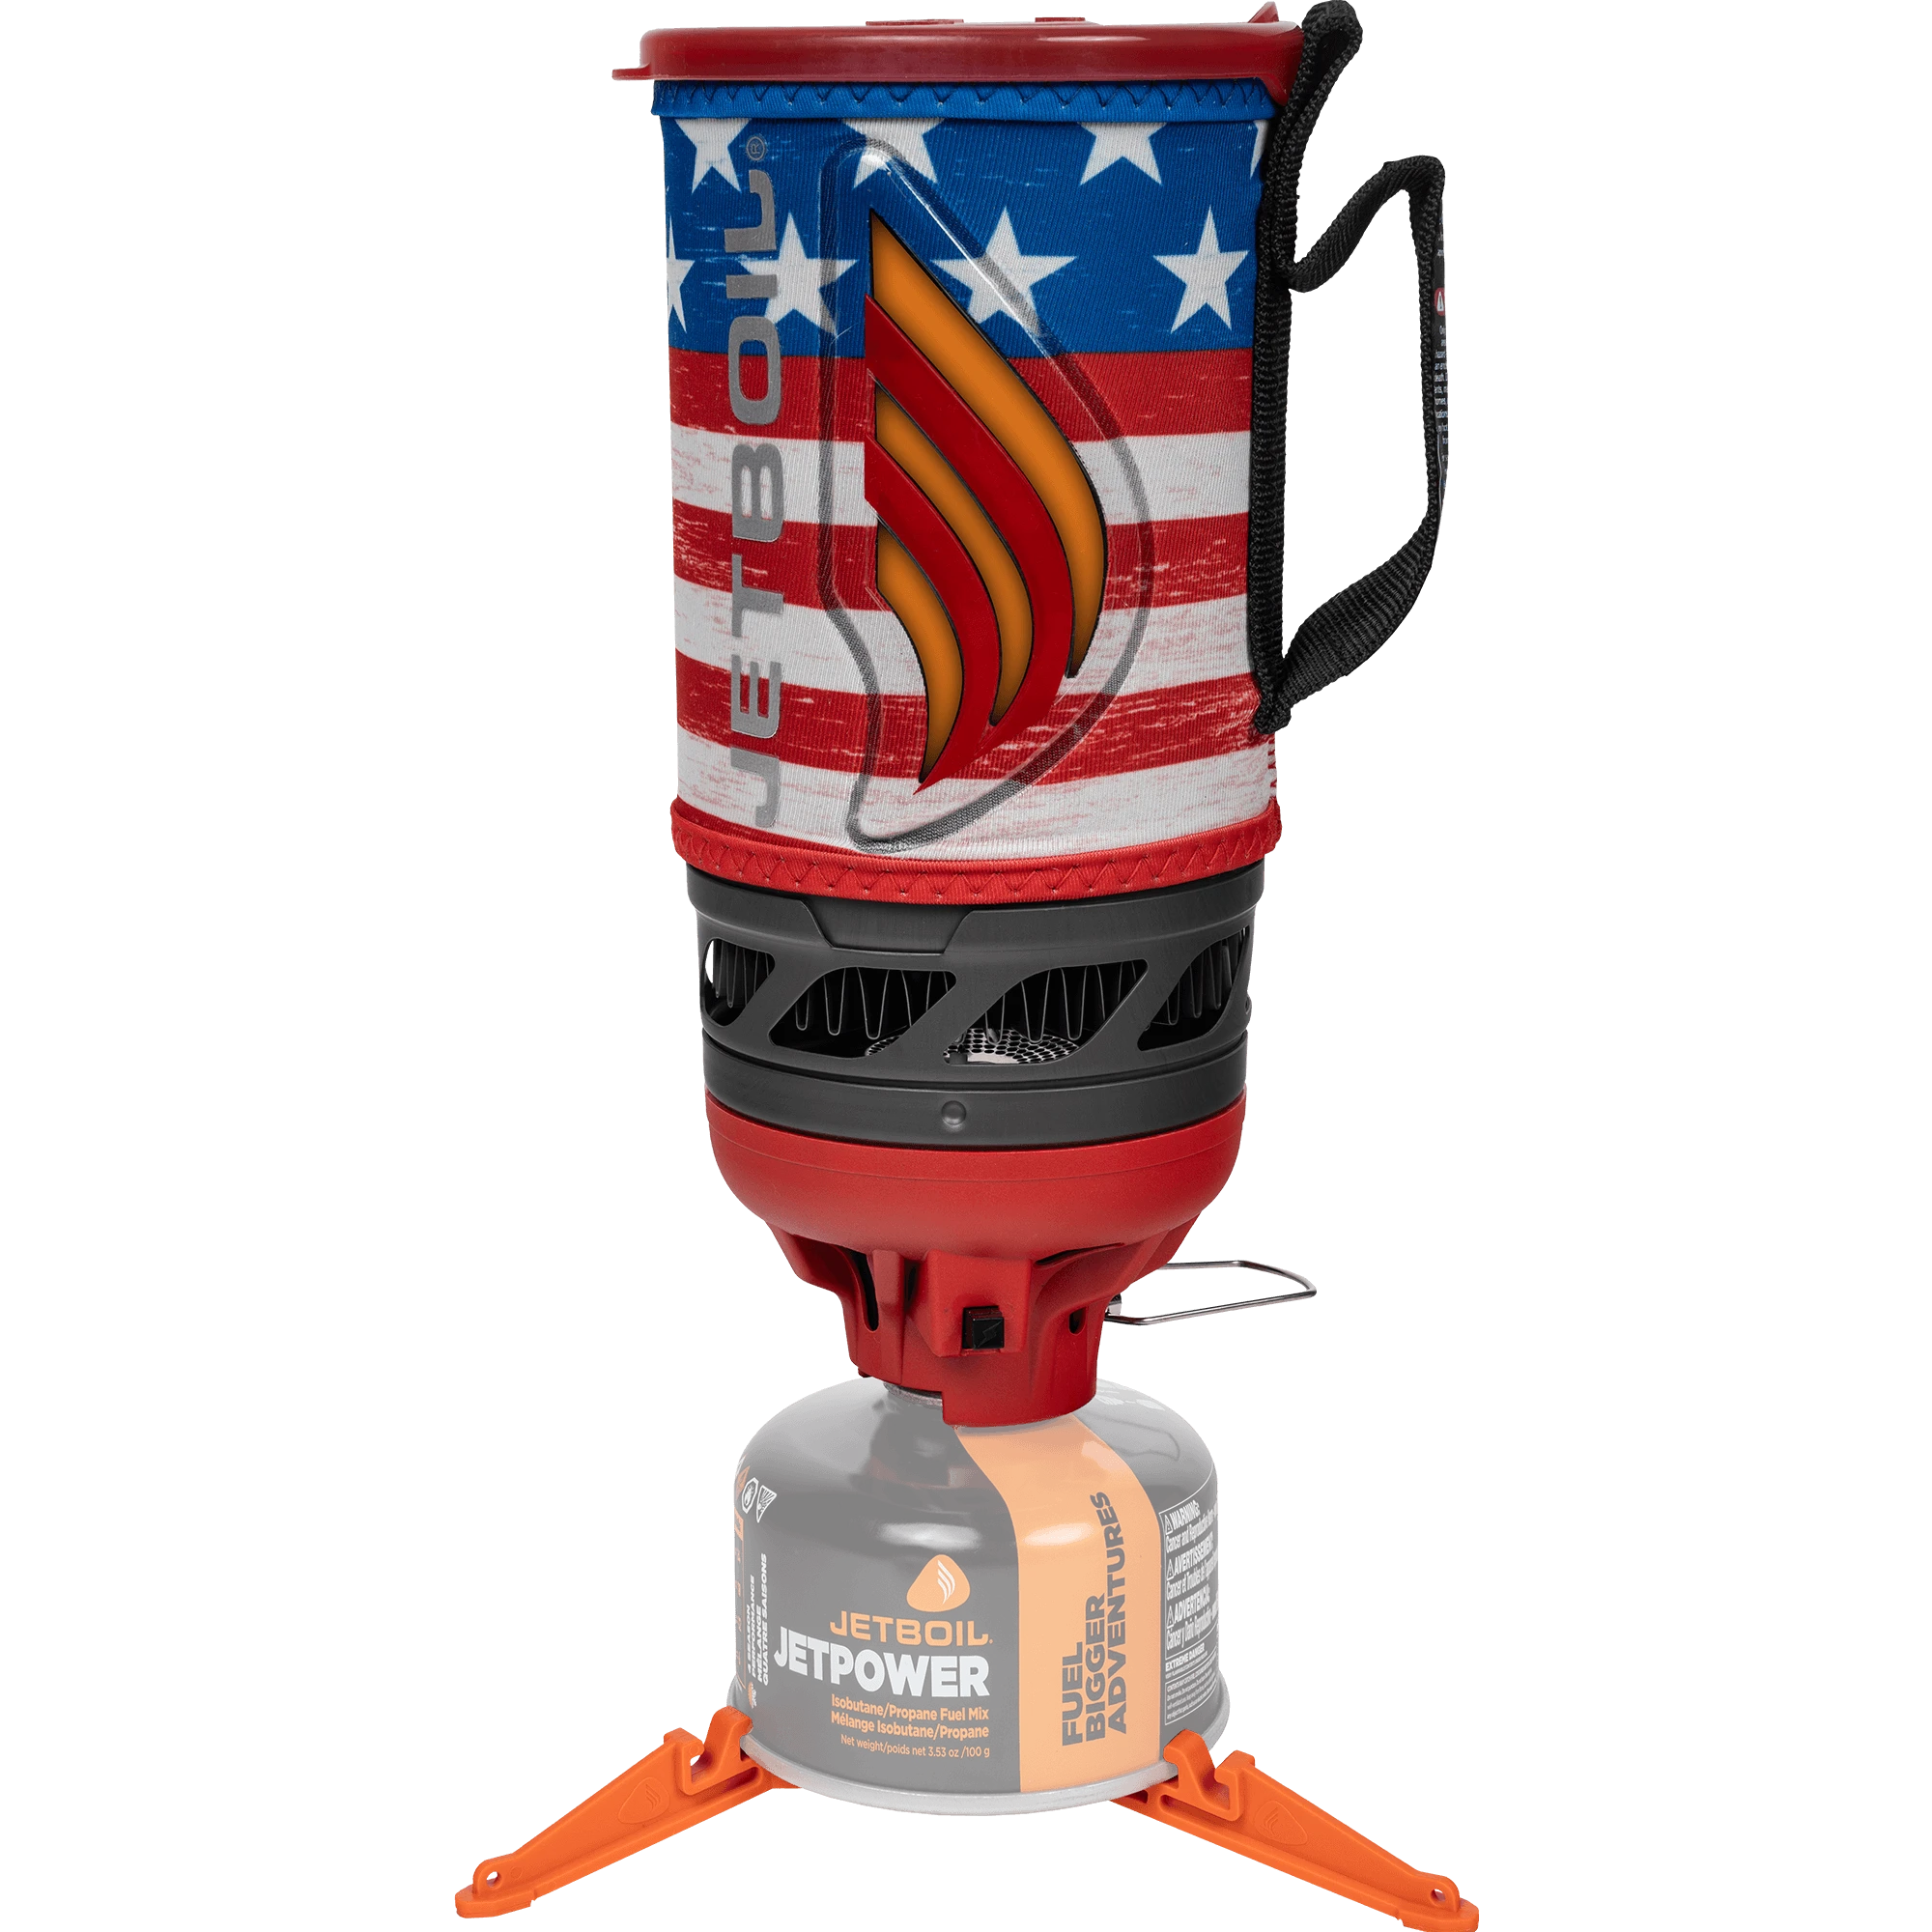 Hot Heat Indicator the Jetboil Flash Cooking System cozy in the color Patriotic